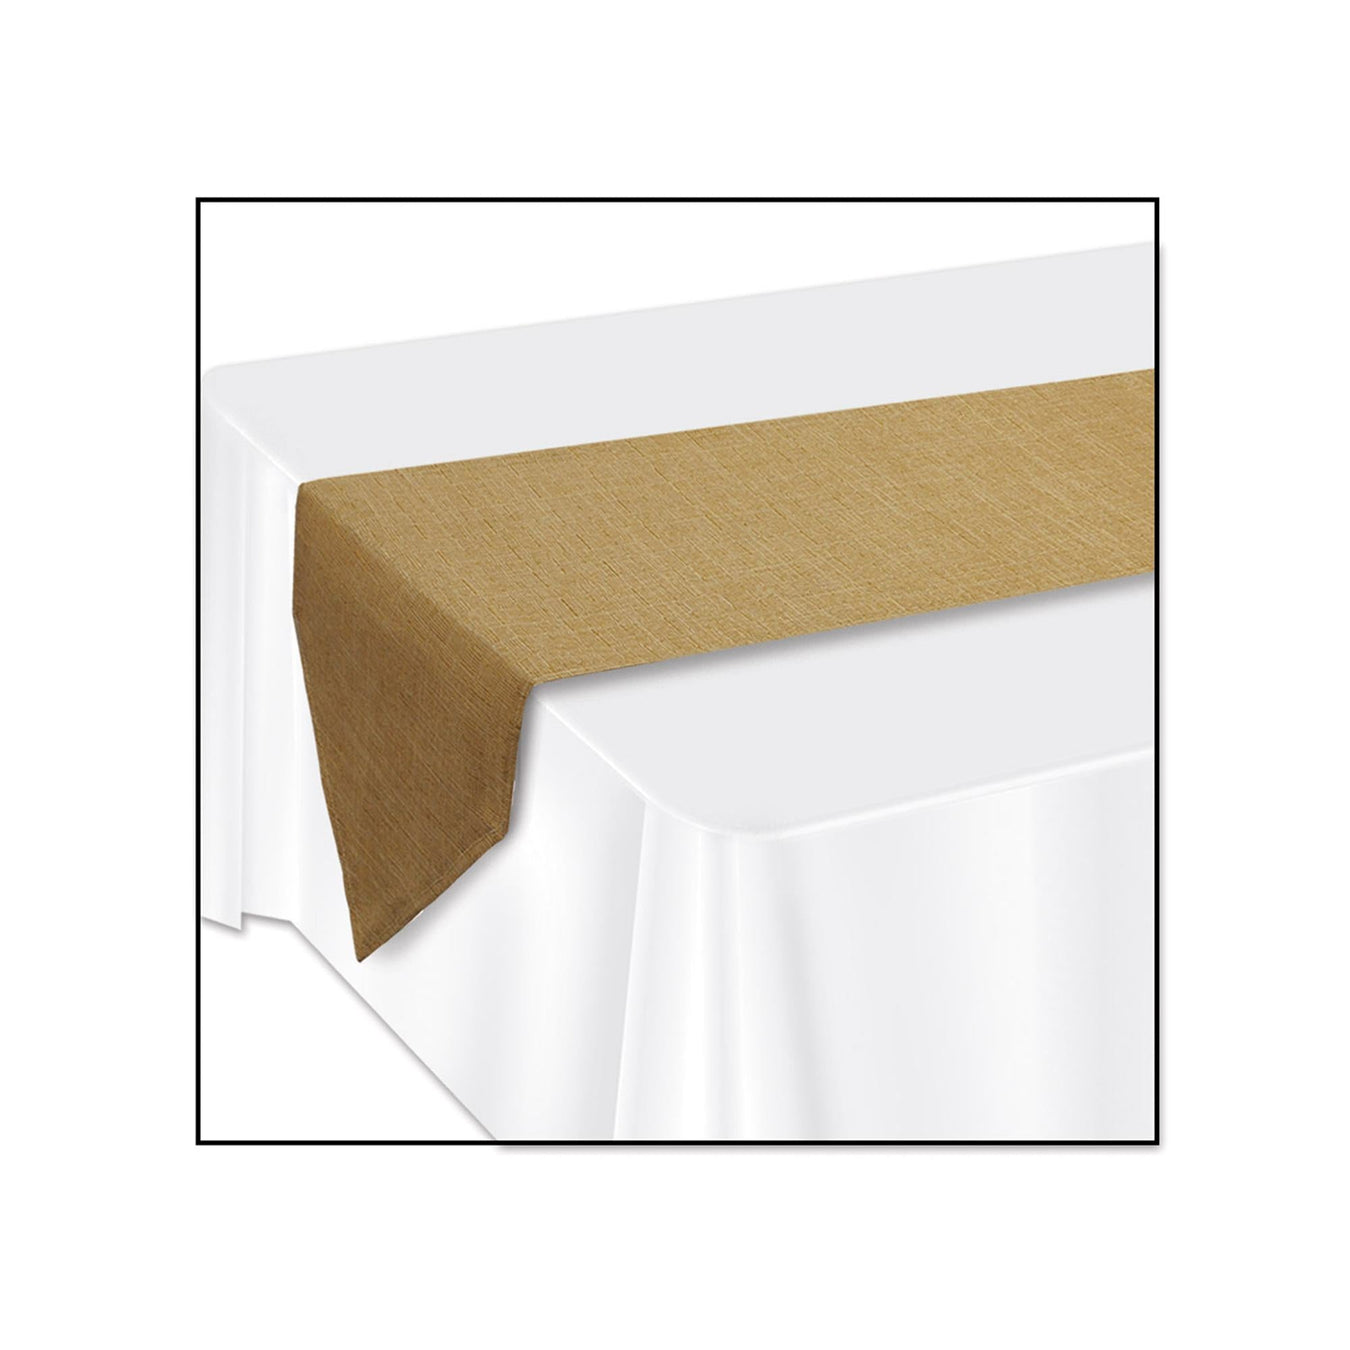 Table Covers in Different Color and Designs